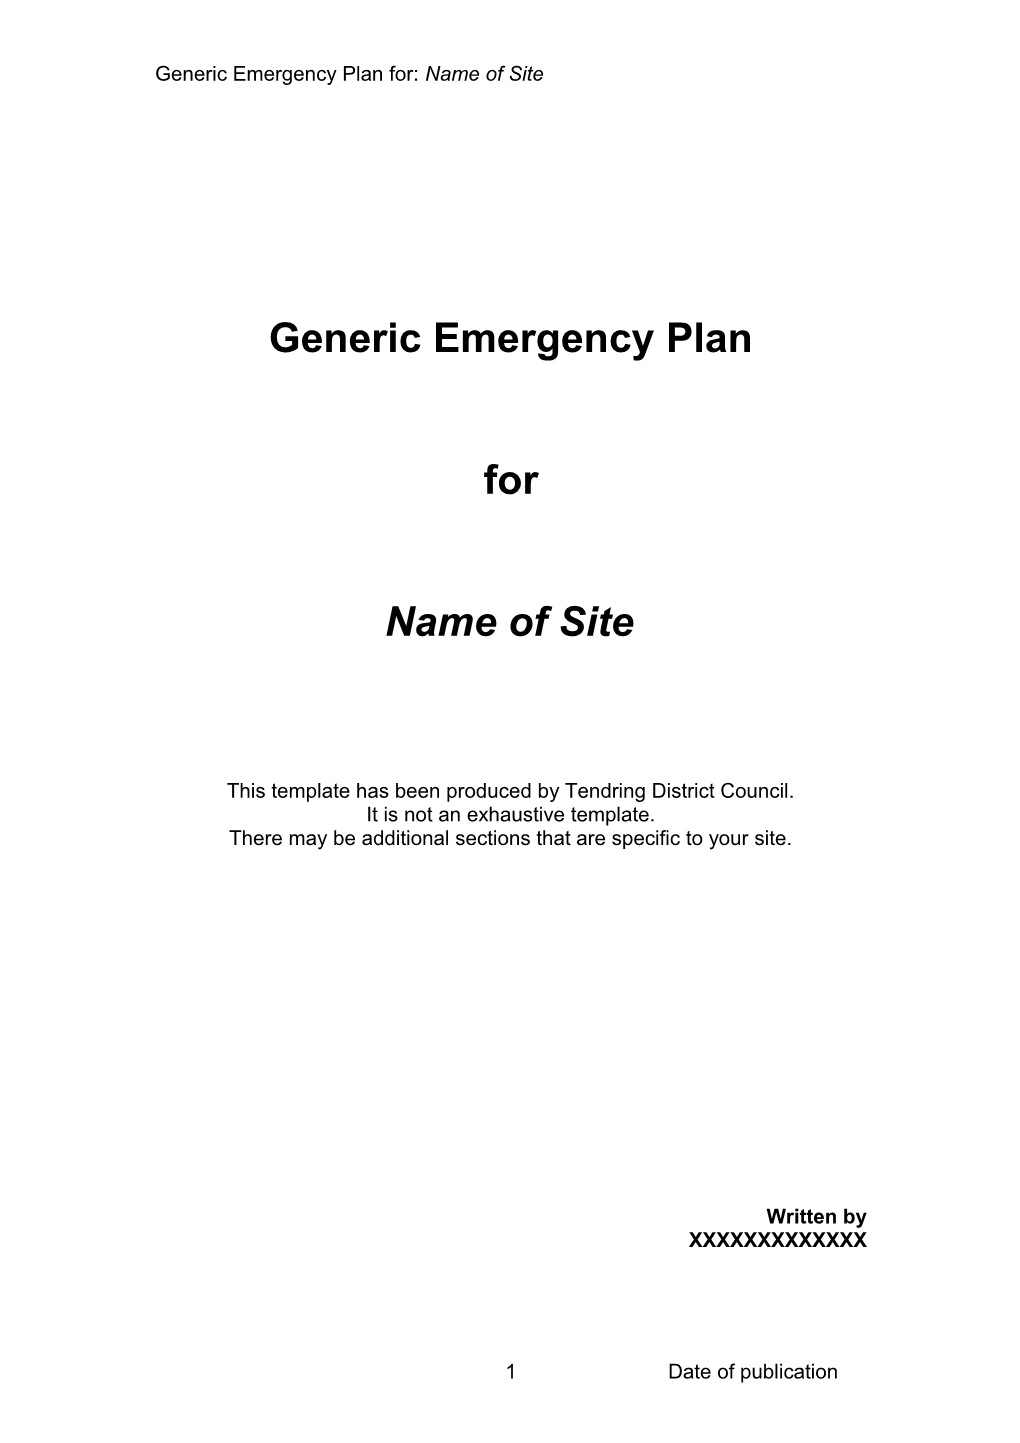 Generic Emergency Planfor:Name of Site